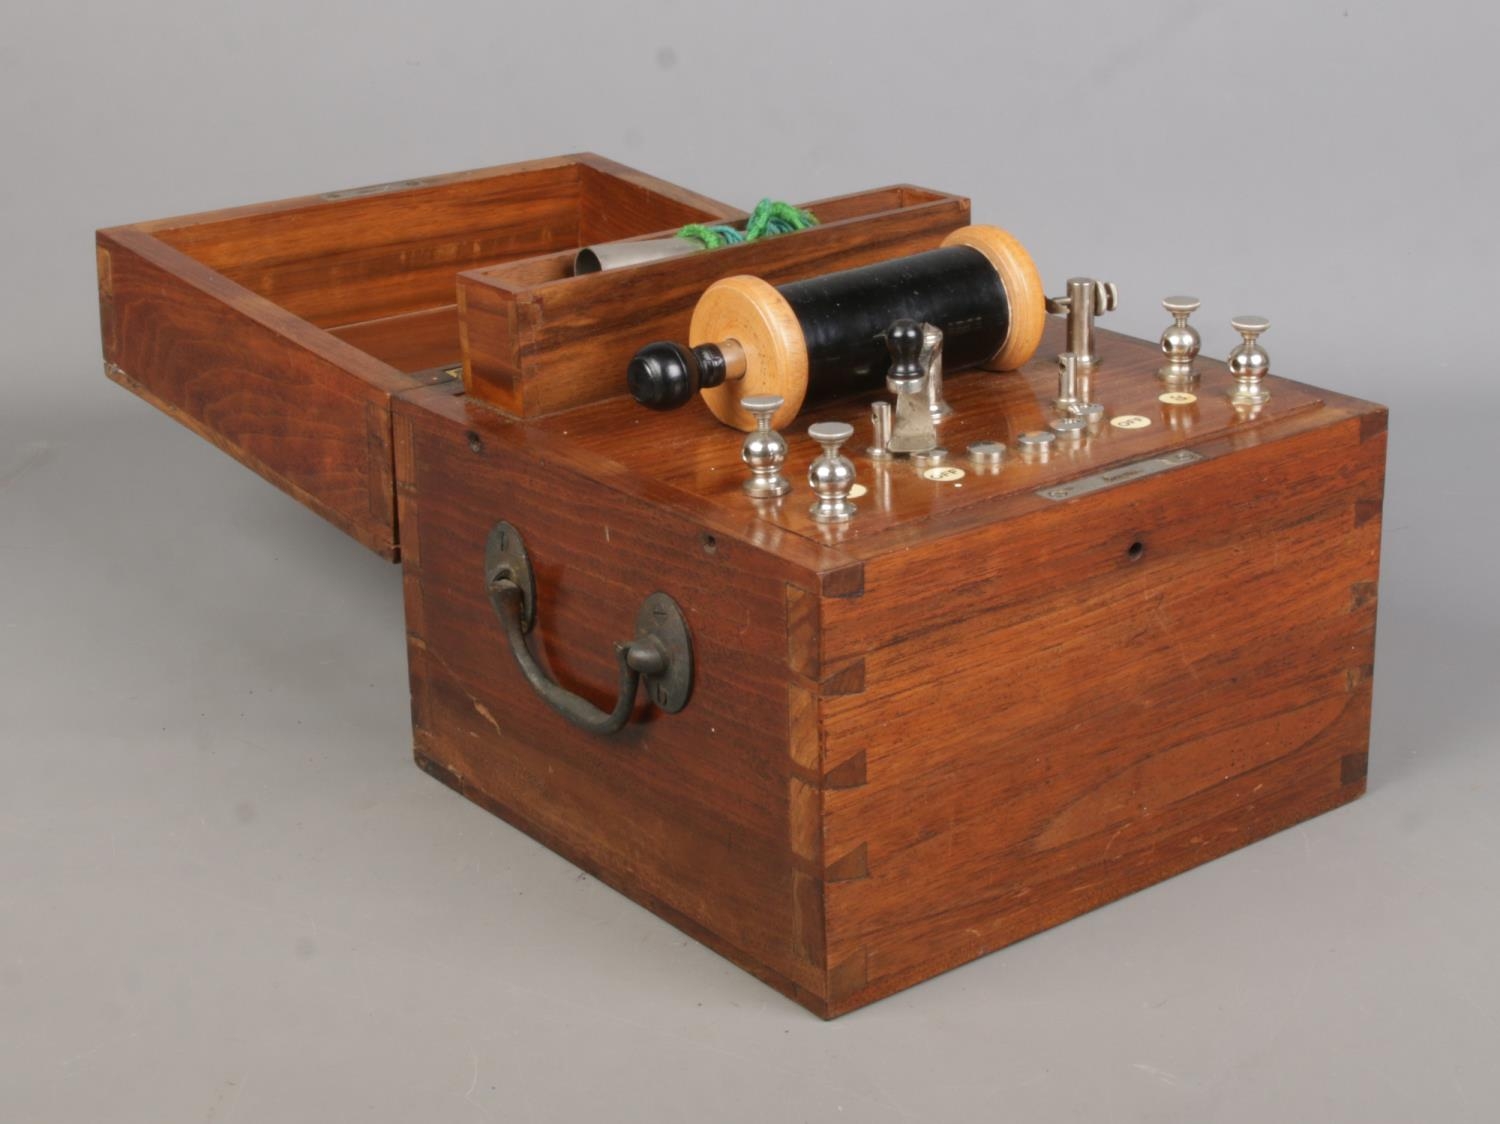 An early Twentieth Century 'Cohen's Patent' shock machine, in fitted box. Requires rewiring.